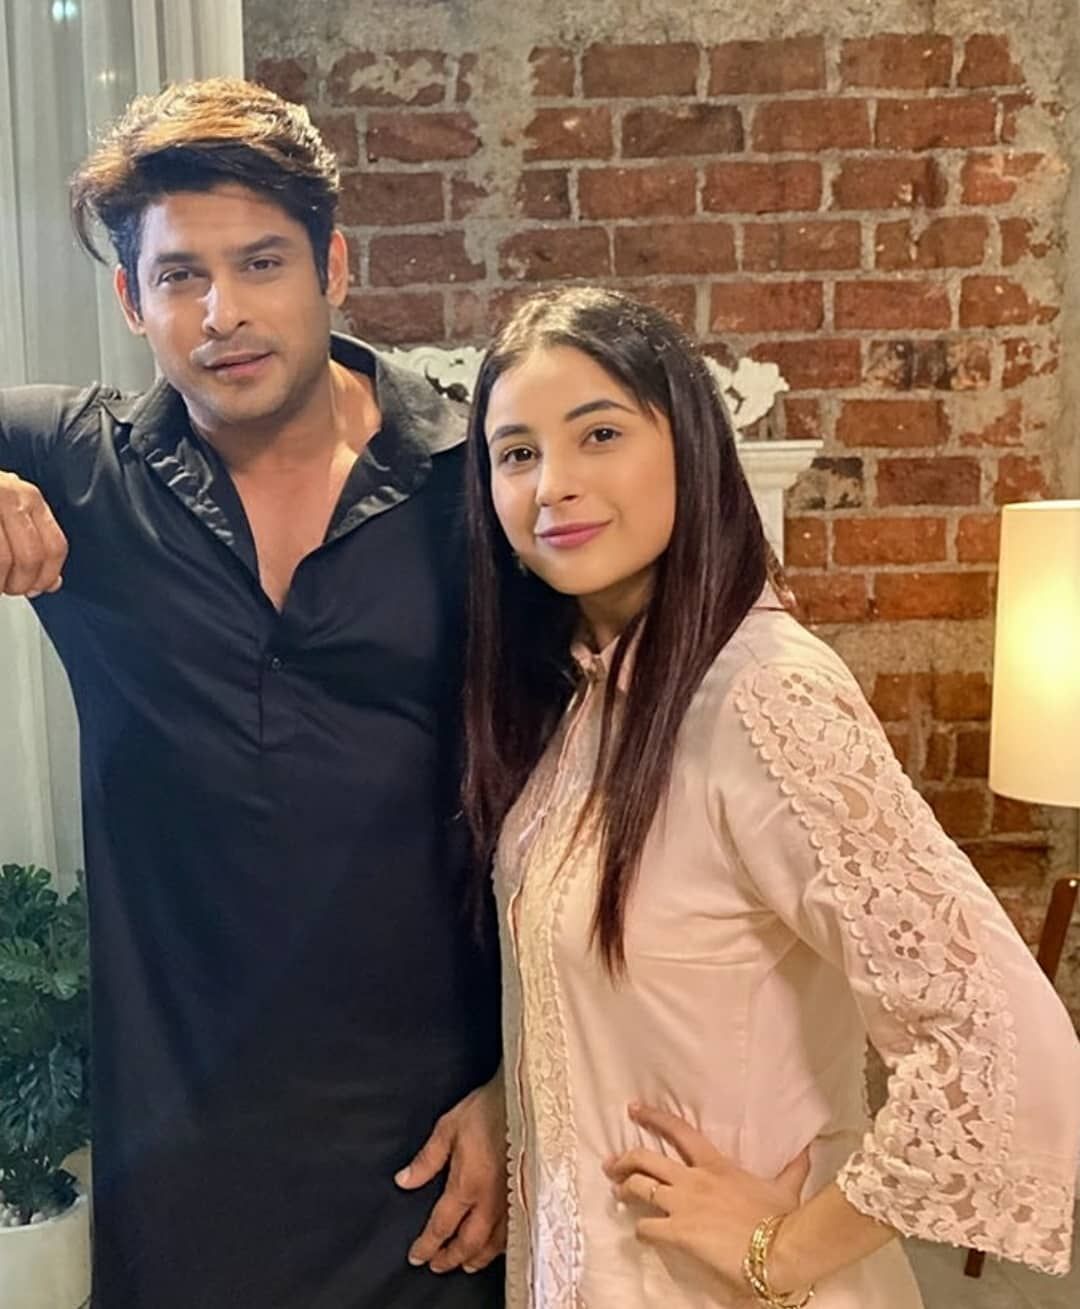 Bigg Boss 14: Sidharth Shukla Talks About Shehnaaz Tells Gauahar They Had No 'Taal Mail', Admits To Hina She Took Care Of Him